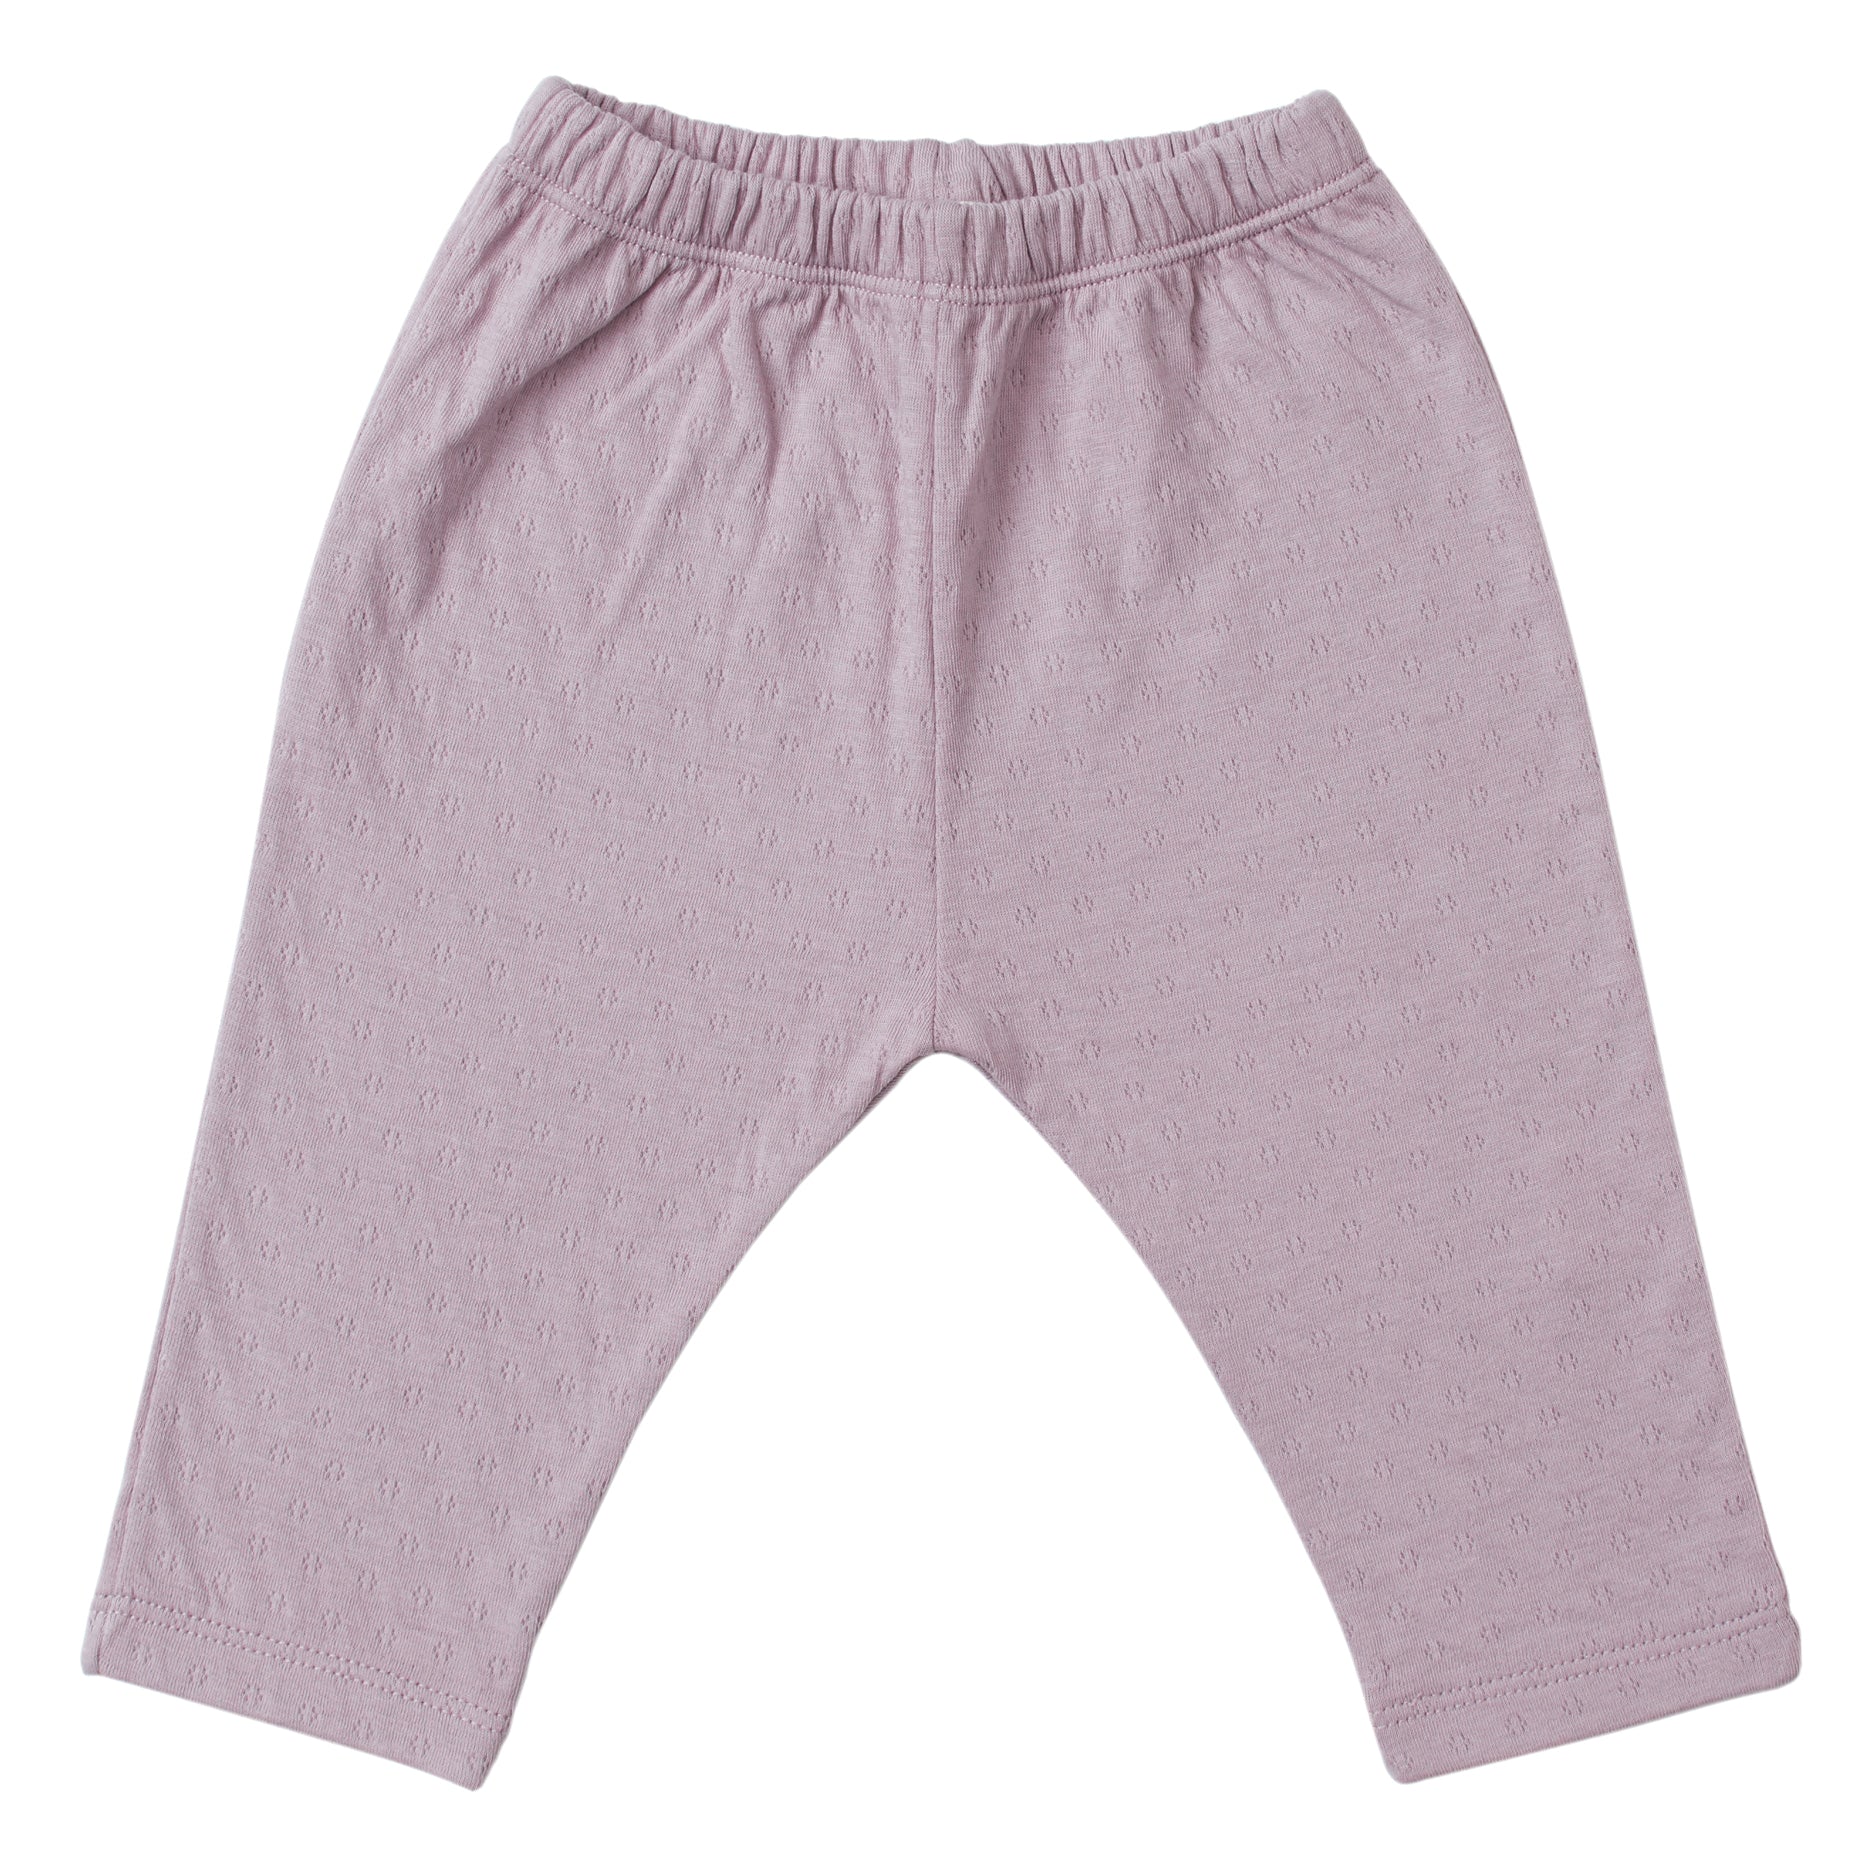 lavender straight leg pointelle ribbed pants with soft encased elastic at waistband.  100% organic cotton.